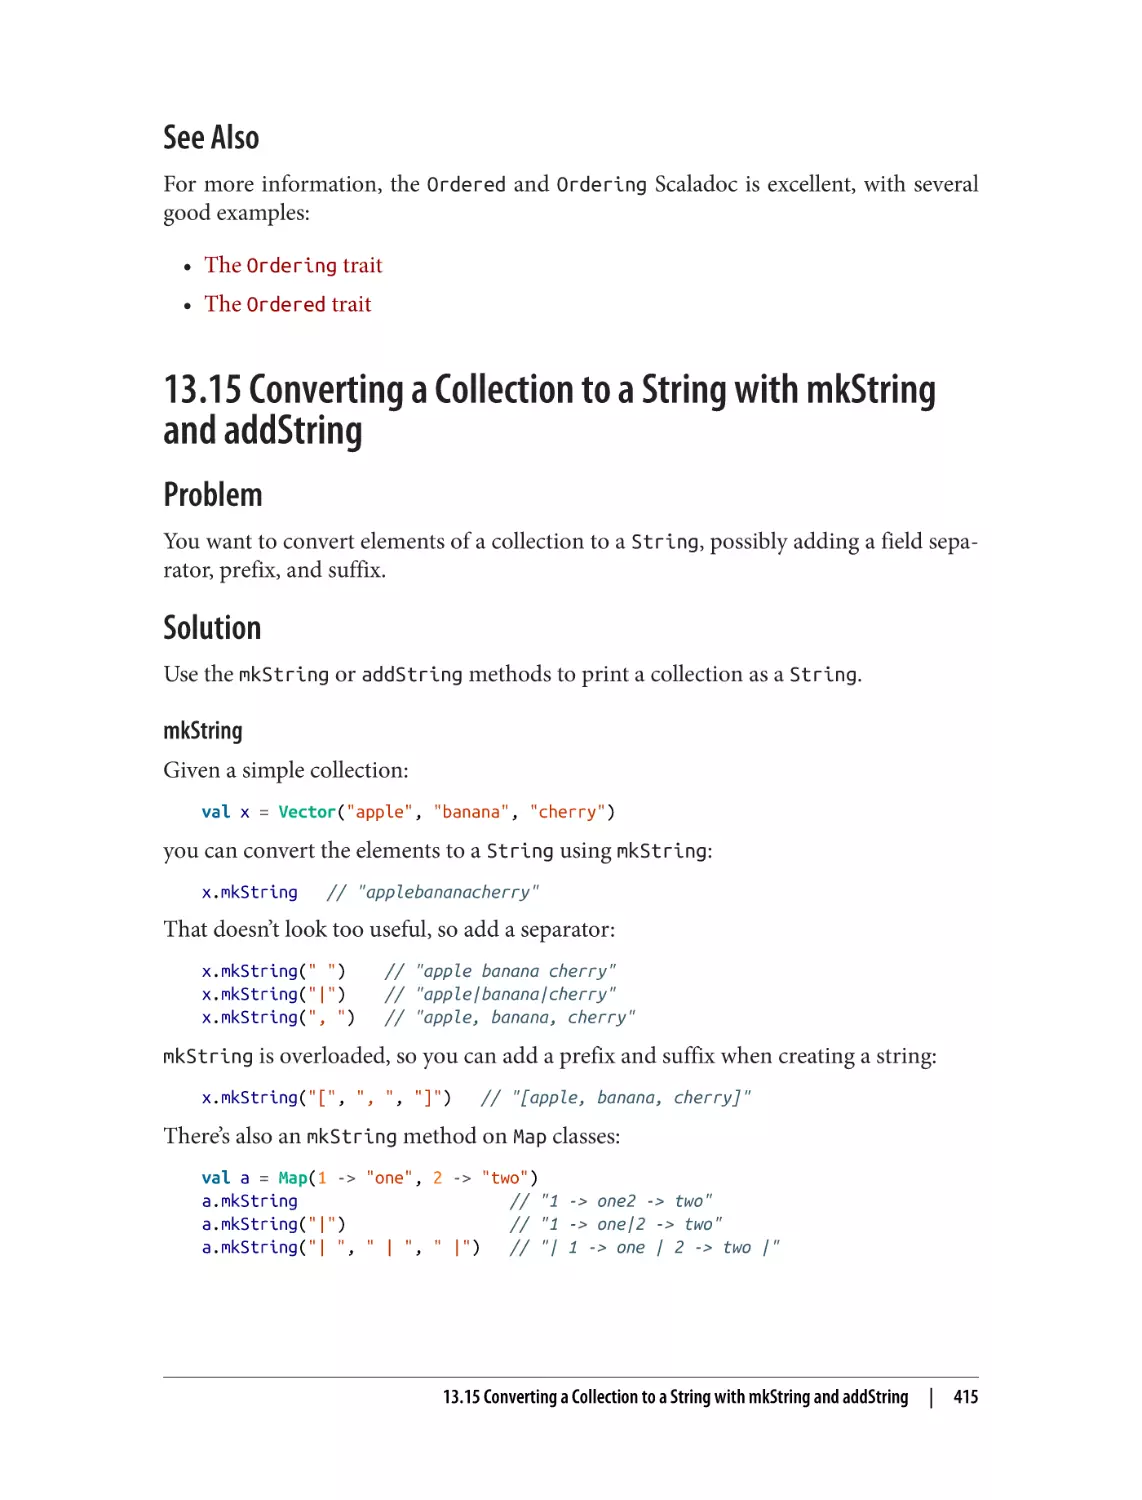 See Also
13.15 Converting a Collection to a String with mkString and addString
Problem
Solution